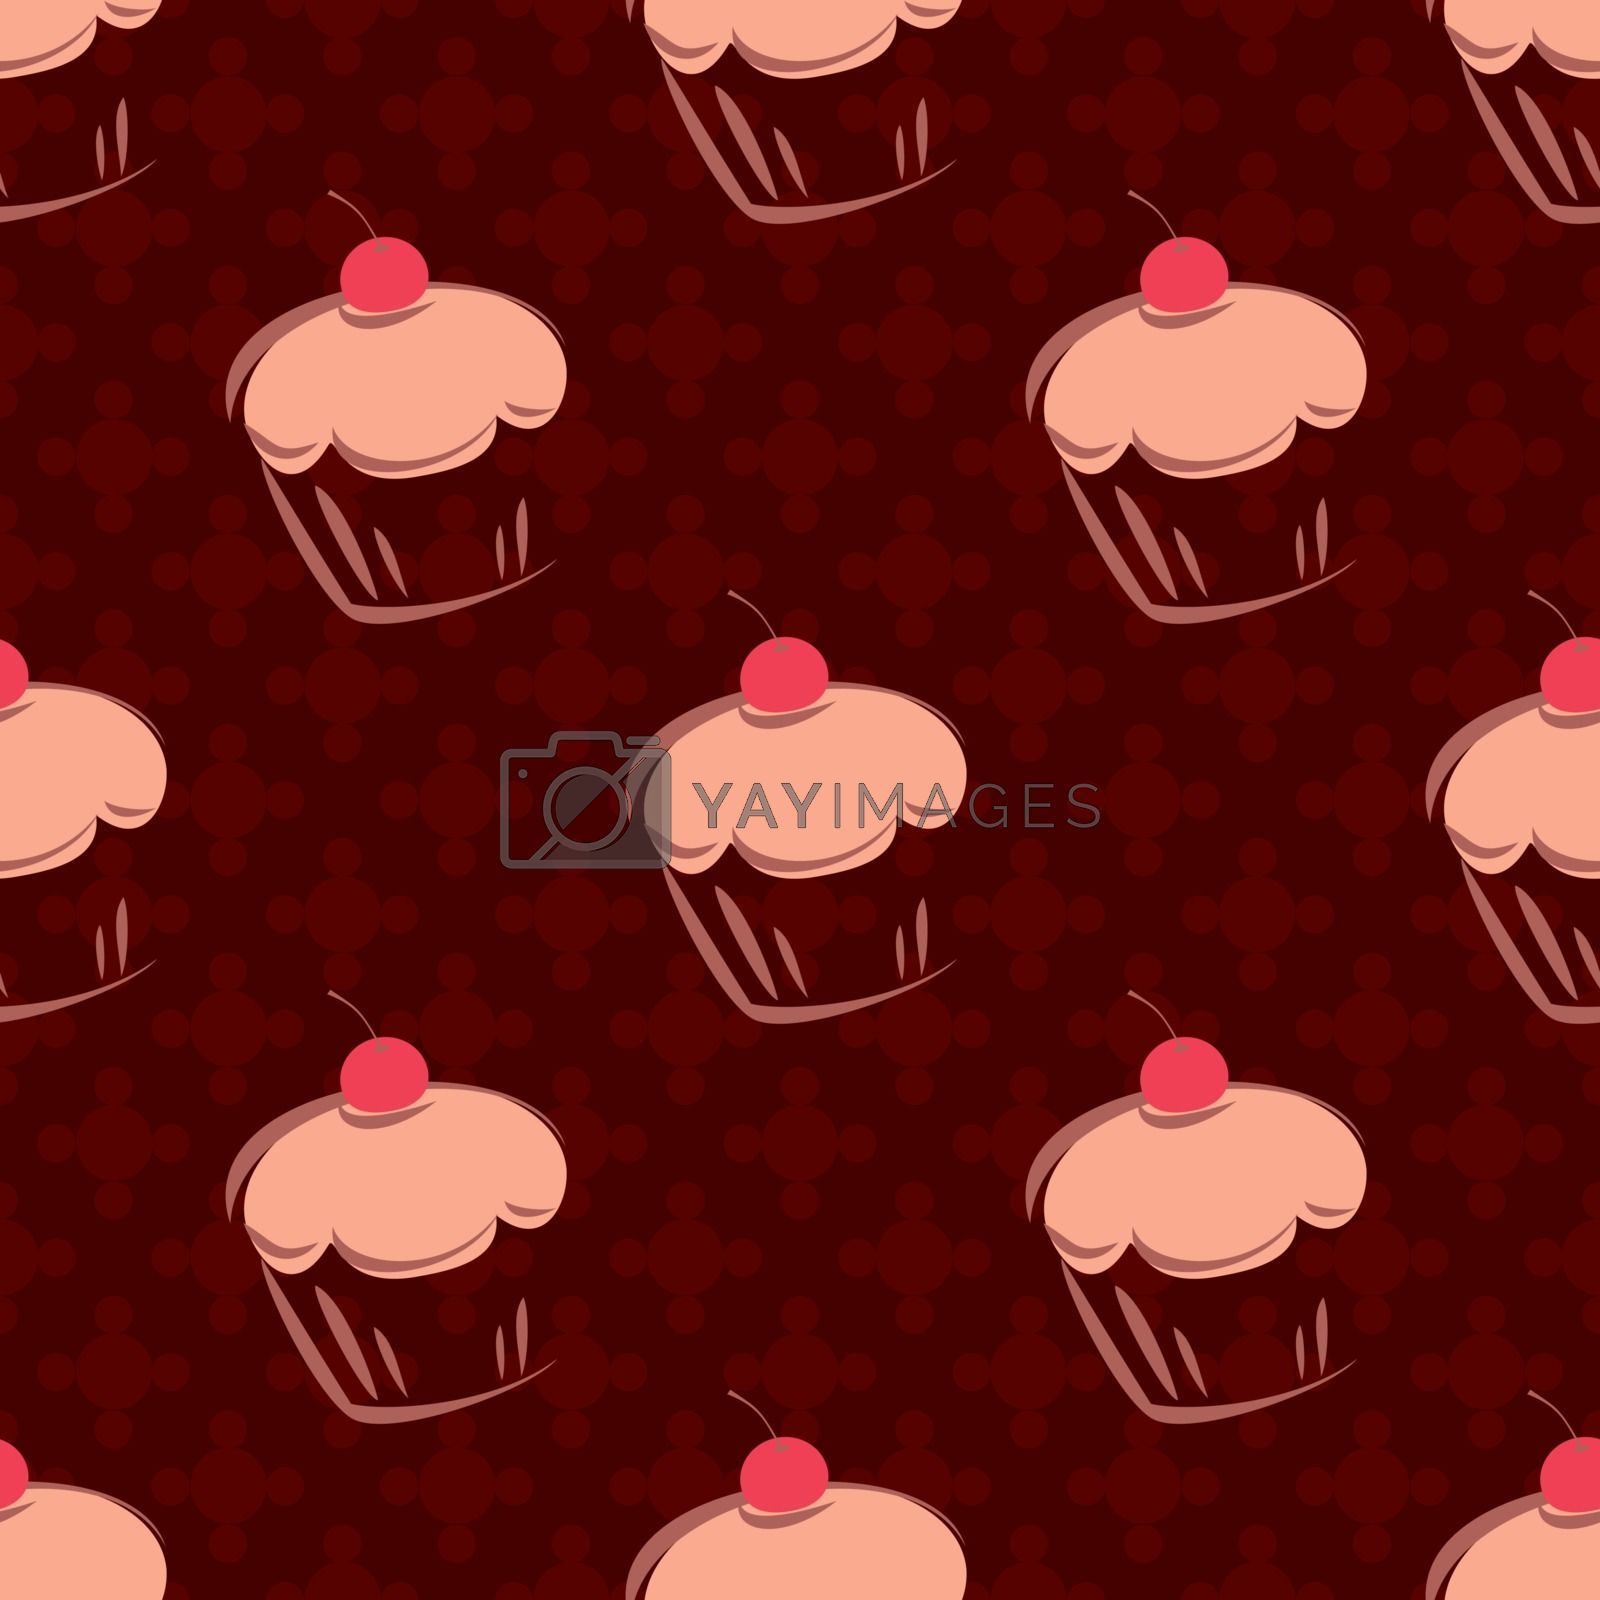 Tile vector cake wallpaper or cupcake background pattern Royalty Free Stock Image. YAYIMAGES Free and Vectors